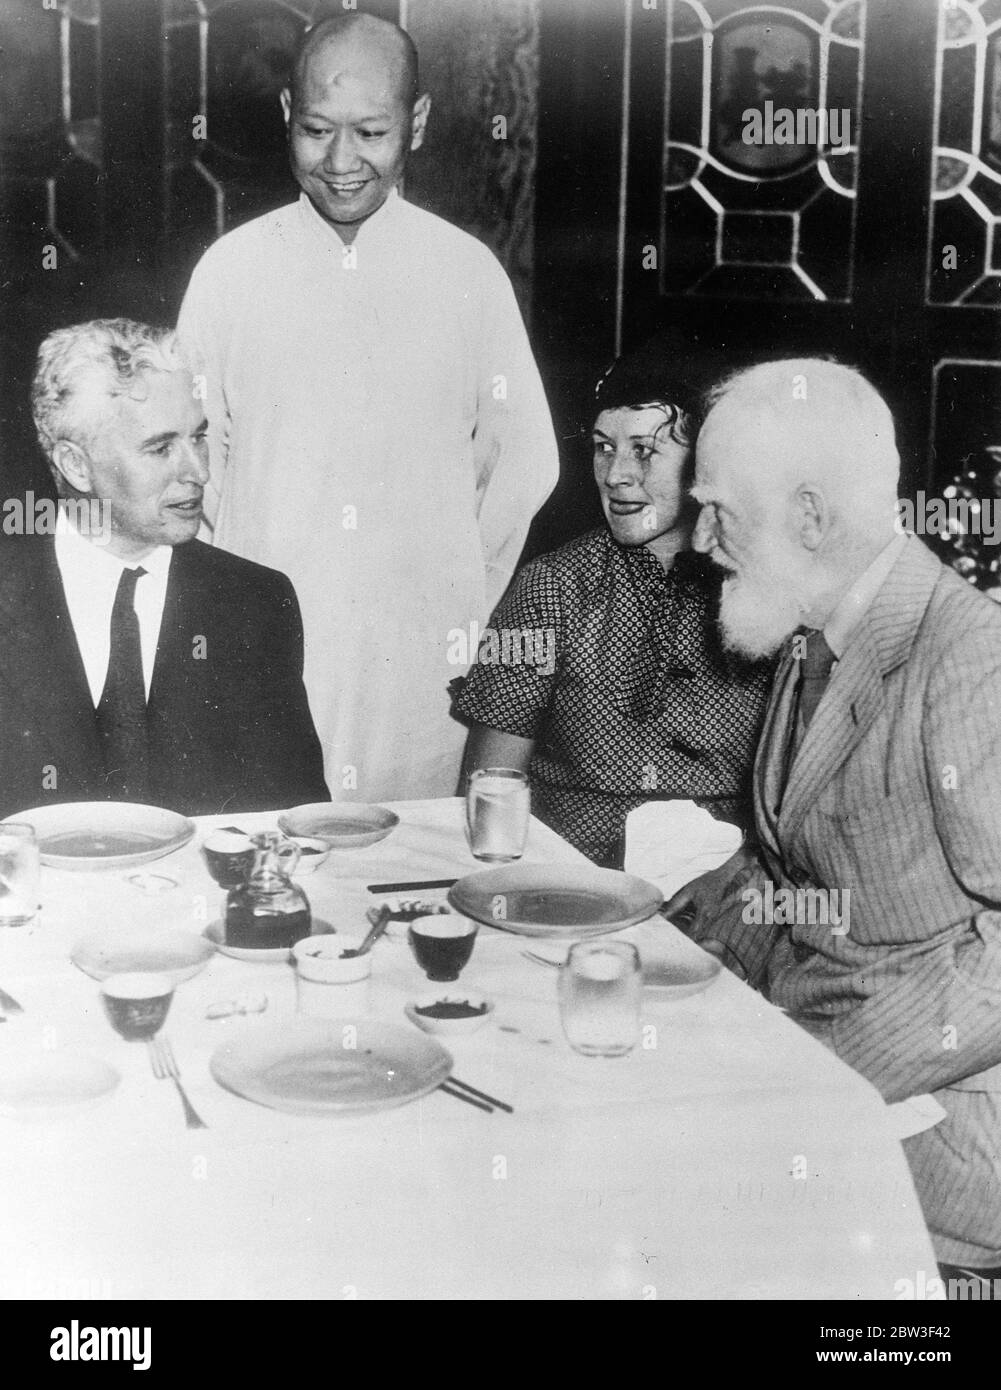 Charles Chaplin , now engaged to Paulette Goddard , lunches with Bernard Show in Honolulu . Charles Chaplin , famous film comedian , who is now reported definitely engaged to Paulette Goddard , his leading Lady in in ' Modern Times ' , lunched with George Bernard Shaw in Honolulu where Chaplin made a stay with his fiancee and her mother , Mrs Alta Goddard , during their holiday tour . It is stated that Chaplin kept GBS waiting for 35 minutes in front of the Royal Royal Hawaiian Hotel and that Mr Shaw sputtered and fumed with rage ! Photo shows , Charles Chaplin and George Bernard Shaw lunching Stock Photo